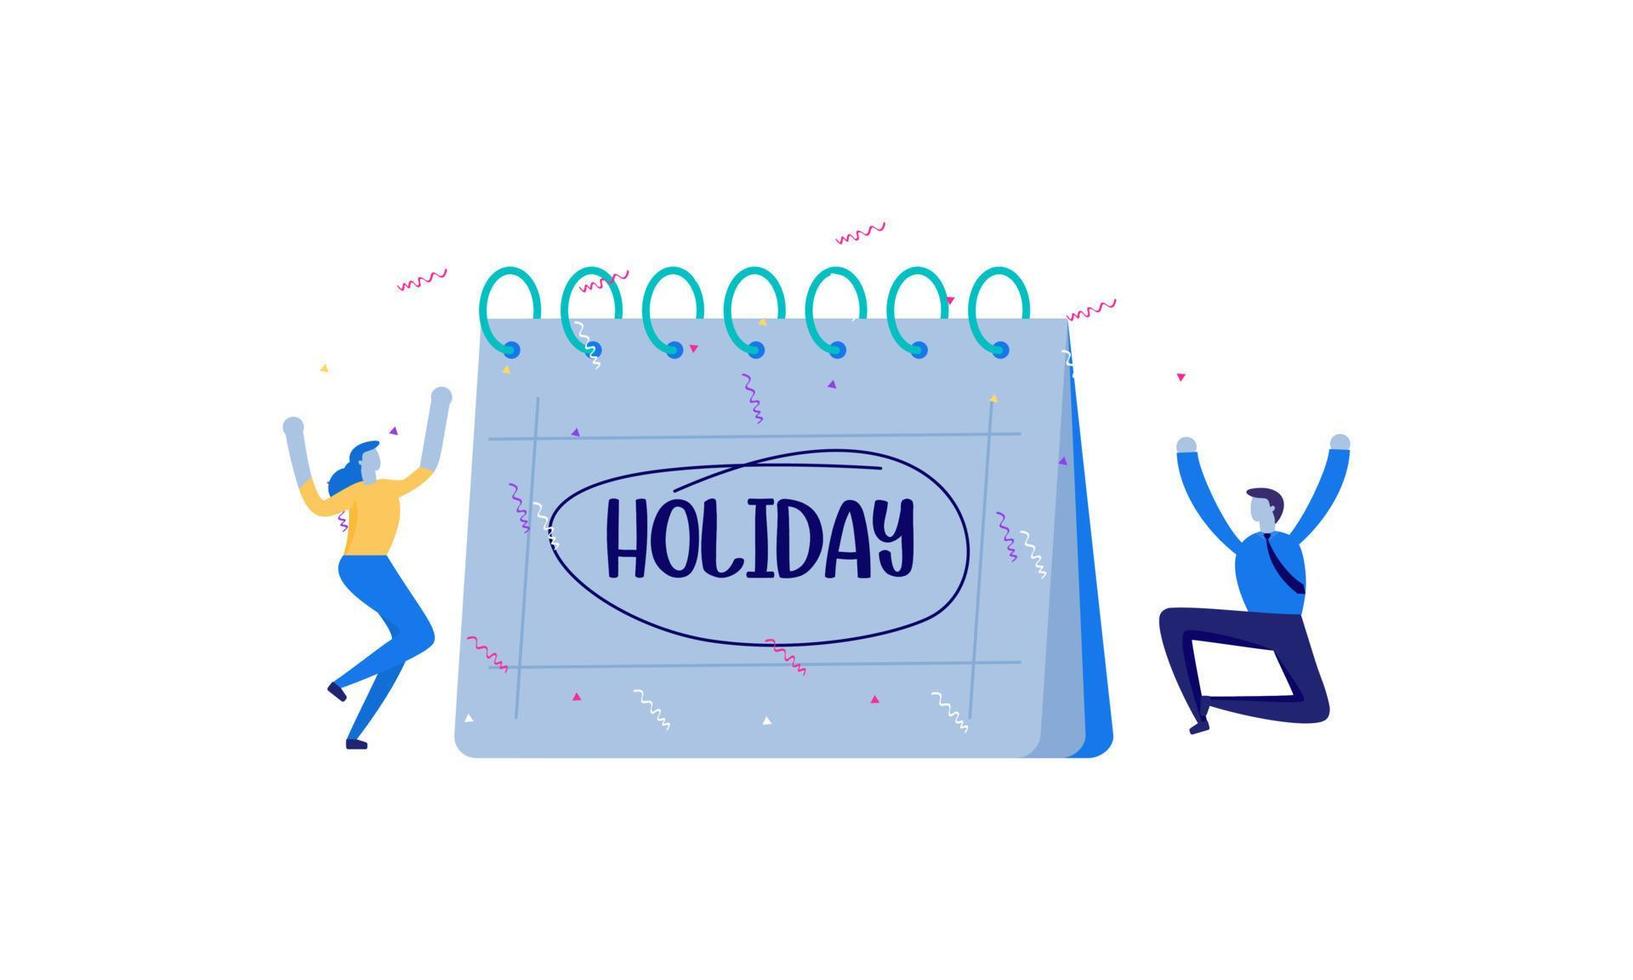 People jumping with joy to celebrate long holidays or vacation illustration vector